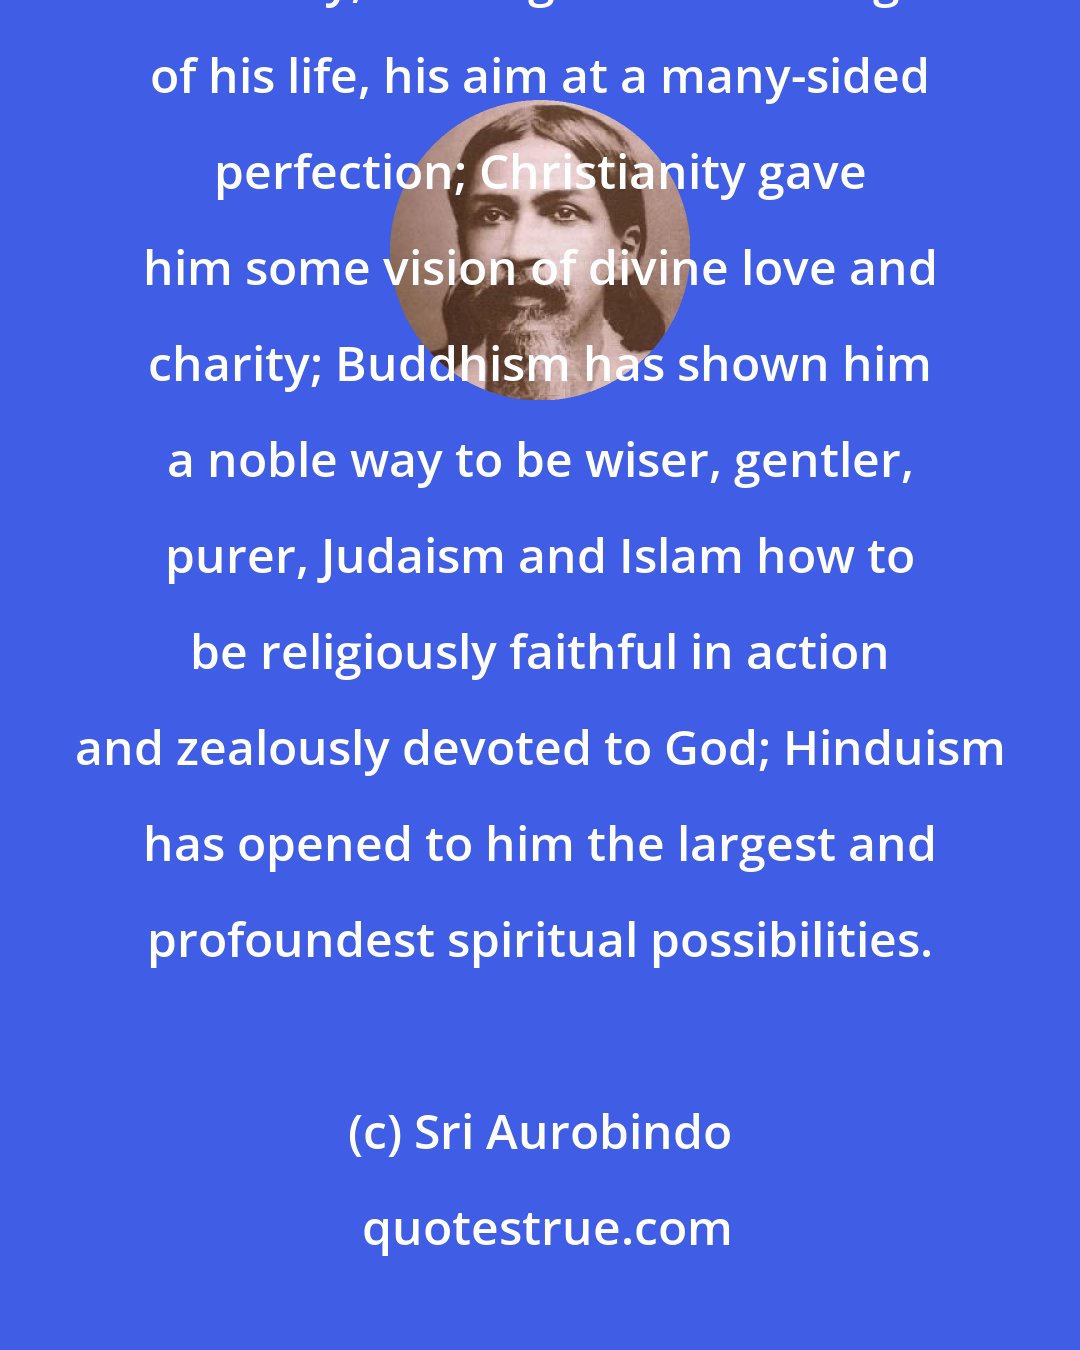 Sri Aurobindo: Each religion has helped mankind. Paganism increased in man the light of beauty, the largeness and height of his life, his aim at a many-sided perfection; Christianity gave him some vision of divine love and charity; Buddhism has shown him a noble way to be wiser, gentler, purer, Judaism and Islam how to be religiously faithful in action and zealously devoted to God; Hinduism has opened to him the largest and profoundest spiritual possibilities.